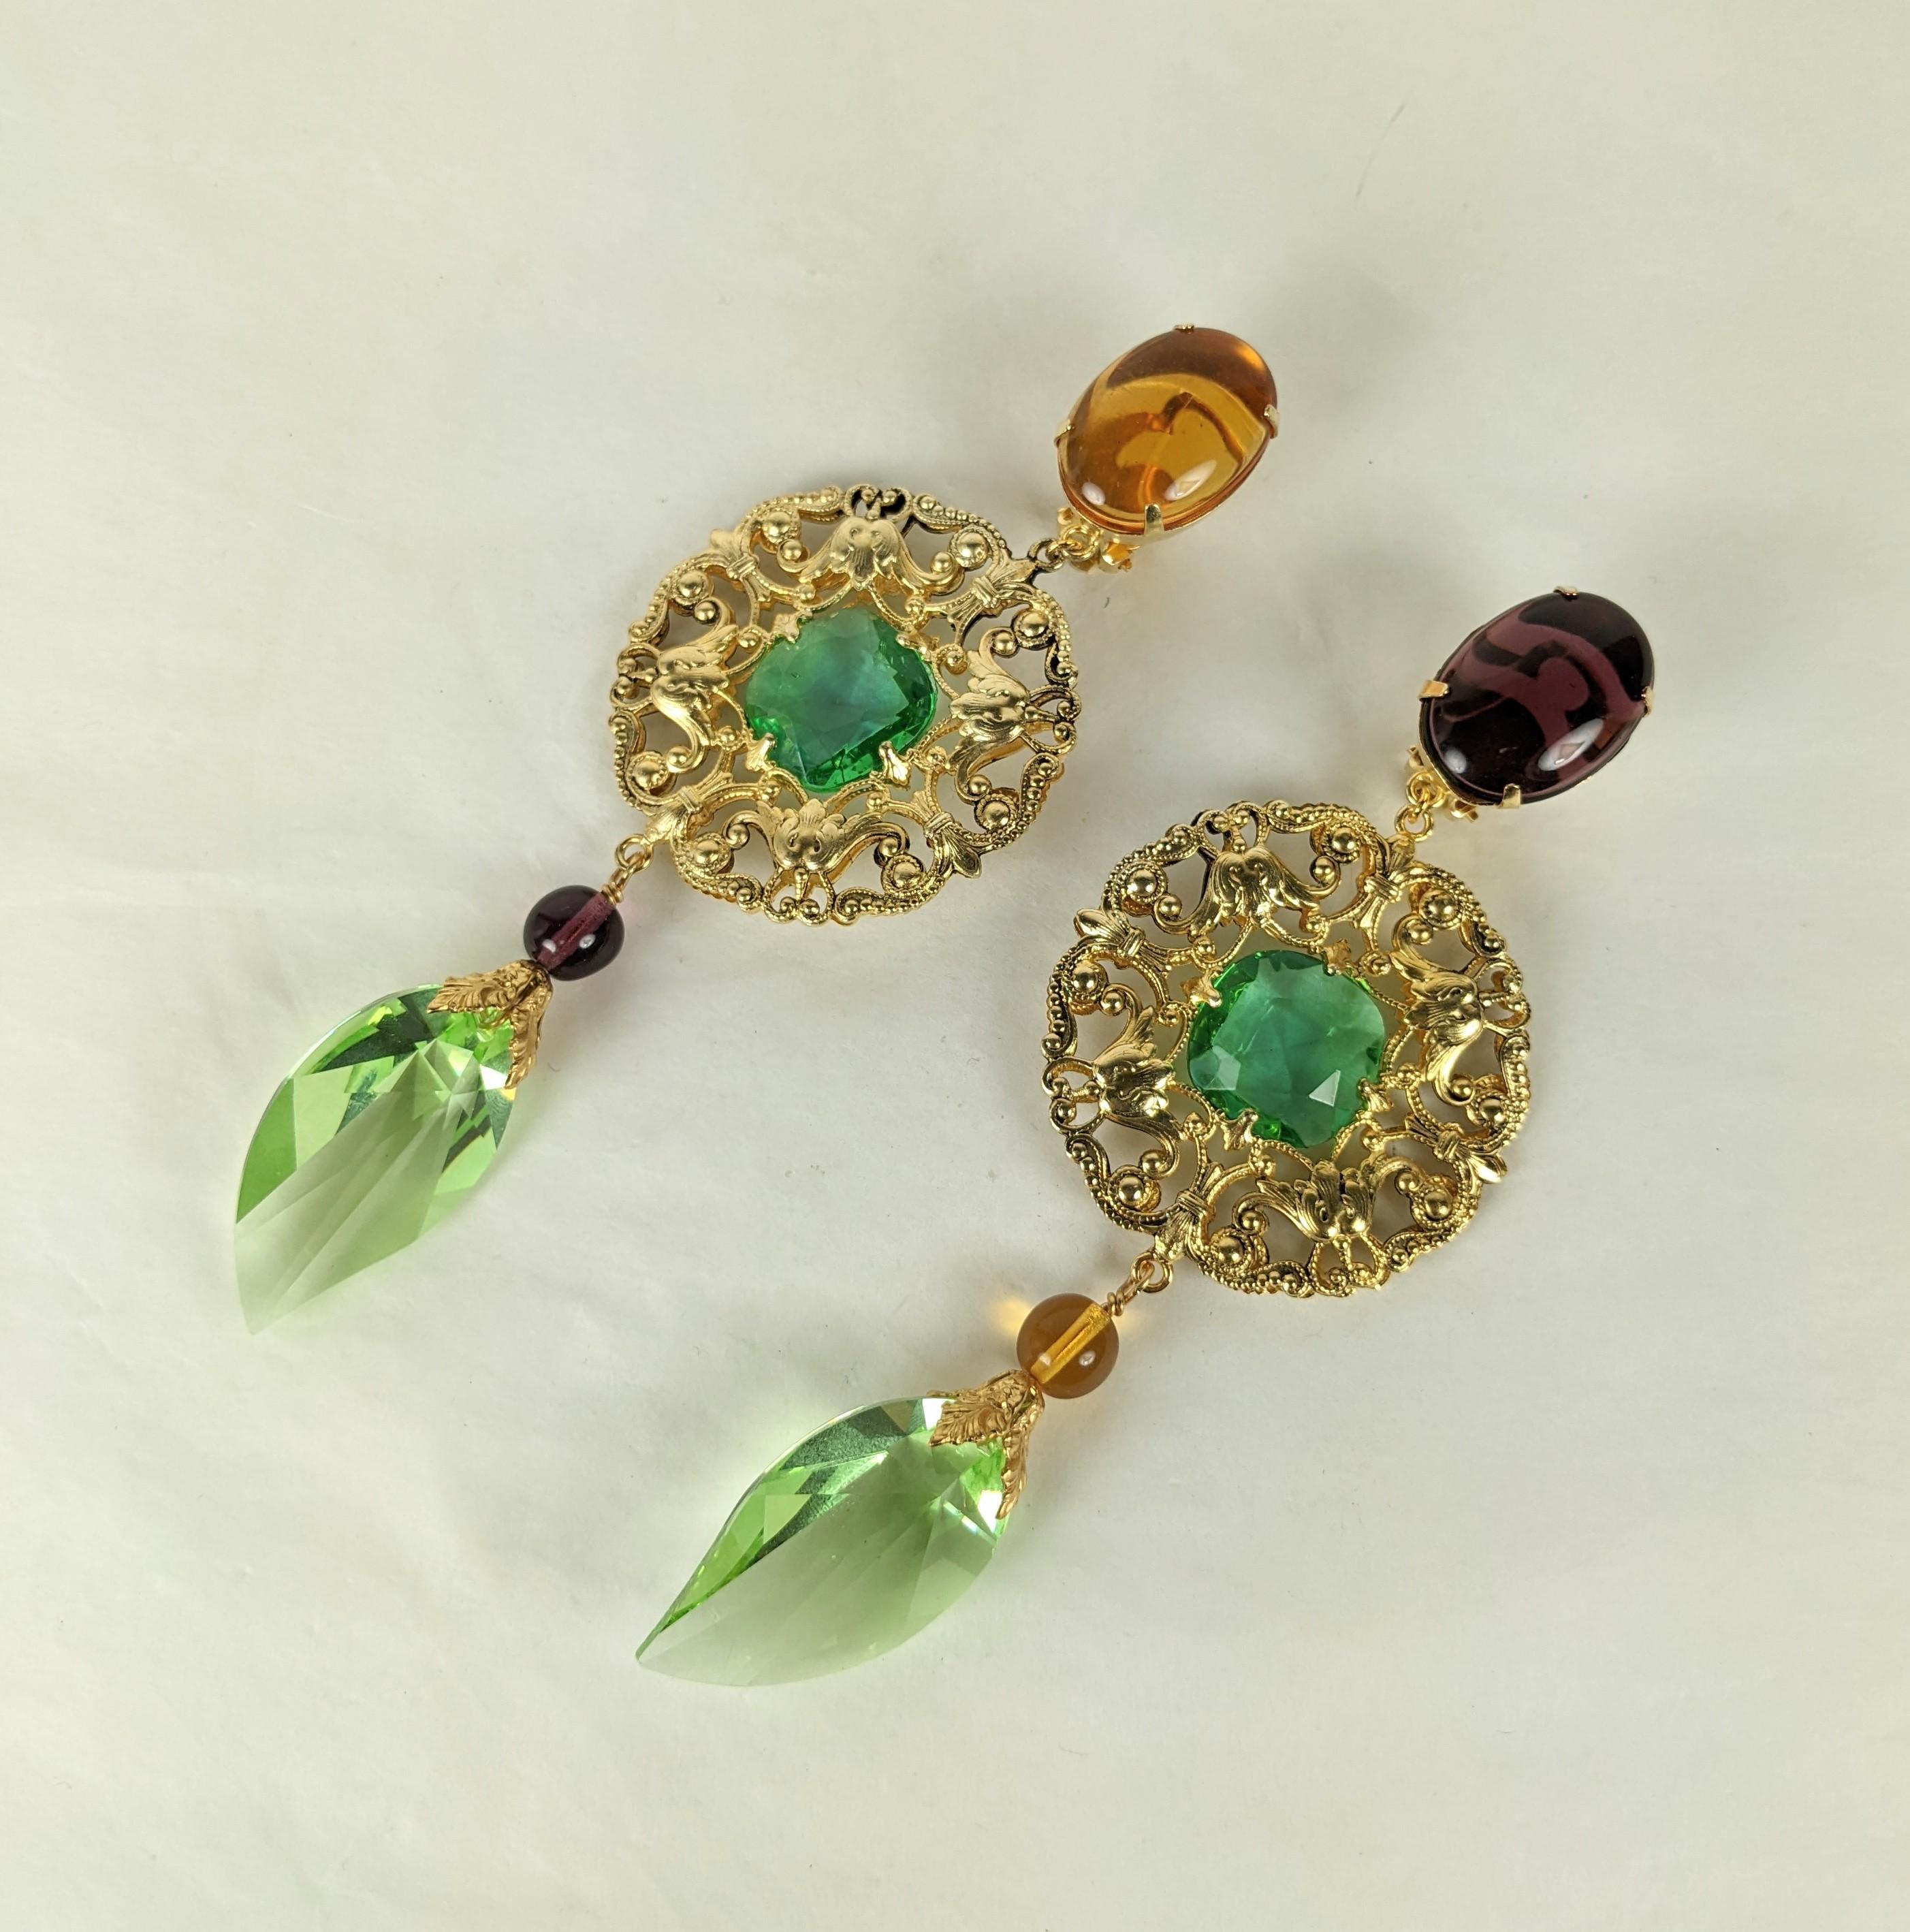 Yves Saint Laurent Haute Couture Asymmetrical Earrings, Maison Goossens In Excellent Condition For Sale In New York, NY